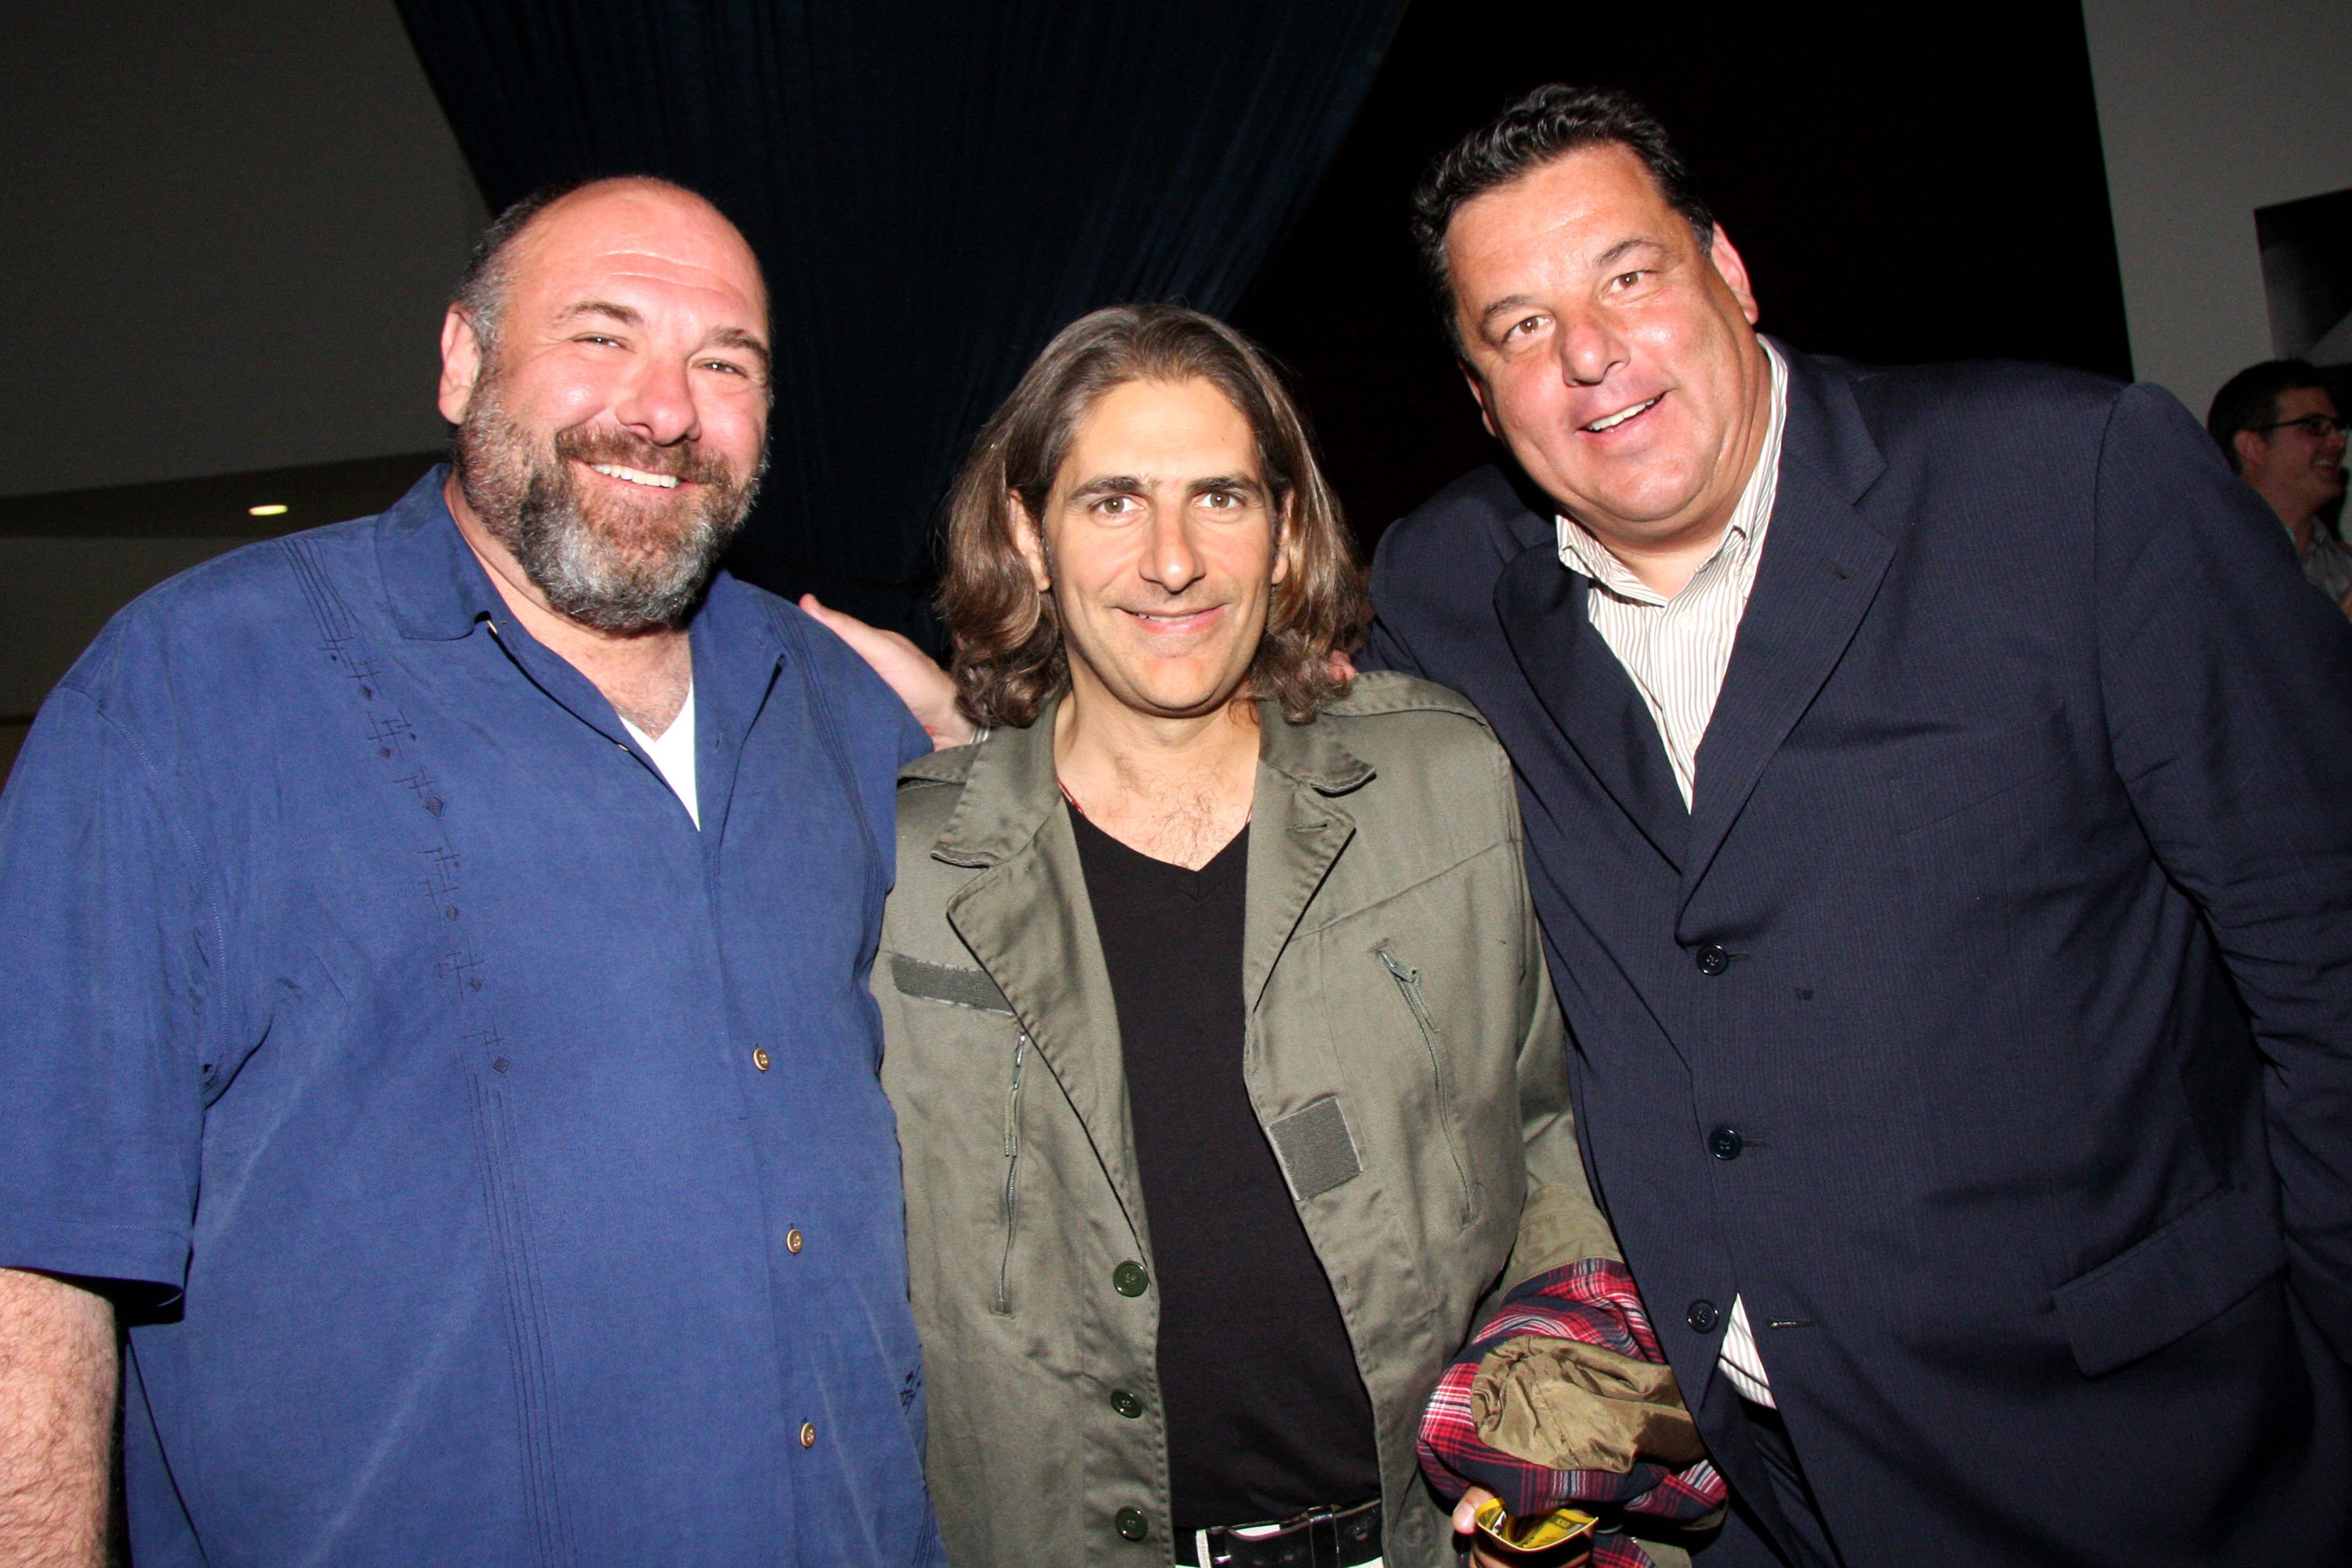 HOLLYWOOD, CA - MAY 20:  (L-R) Actors James Gandolfini, Michael Imperioli and Steve Schirripa attend the "Nicky Deuce" Los Angeles premiere after party held at ArcLight Hollywood on May 20, 2013 in Hollywood, California.  (Photo by Tommaso Boddi/WireImage (Foto: WireImage)